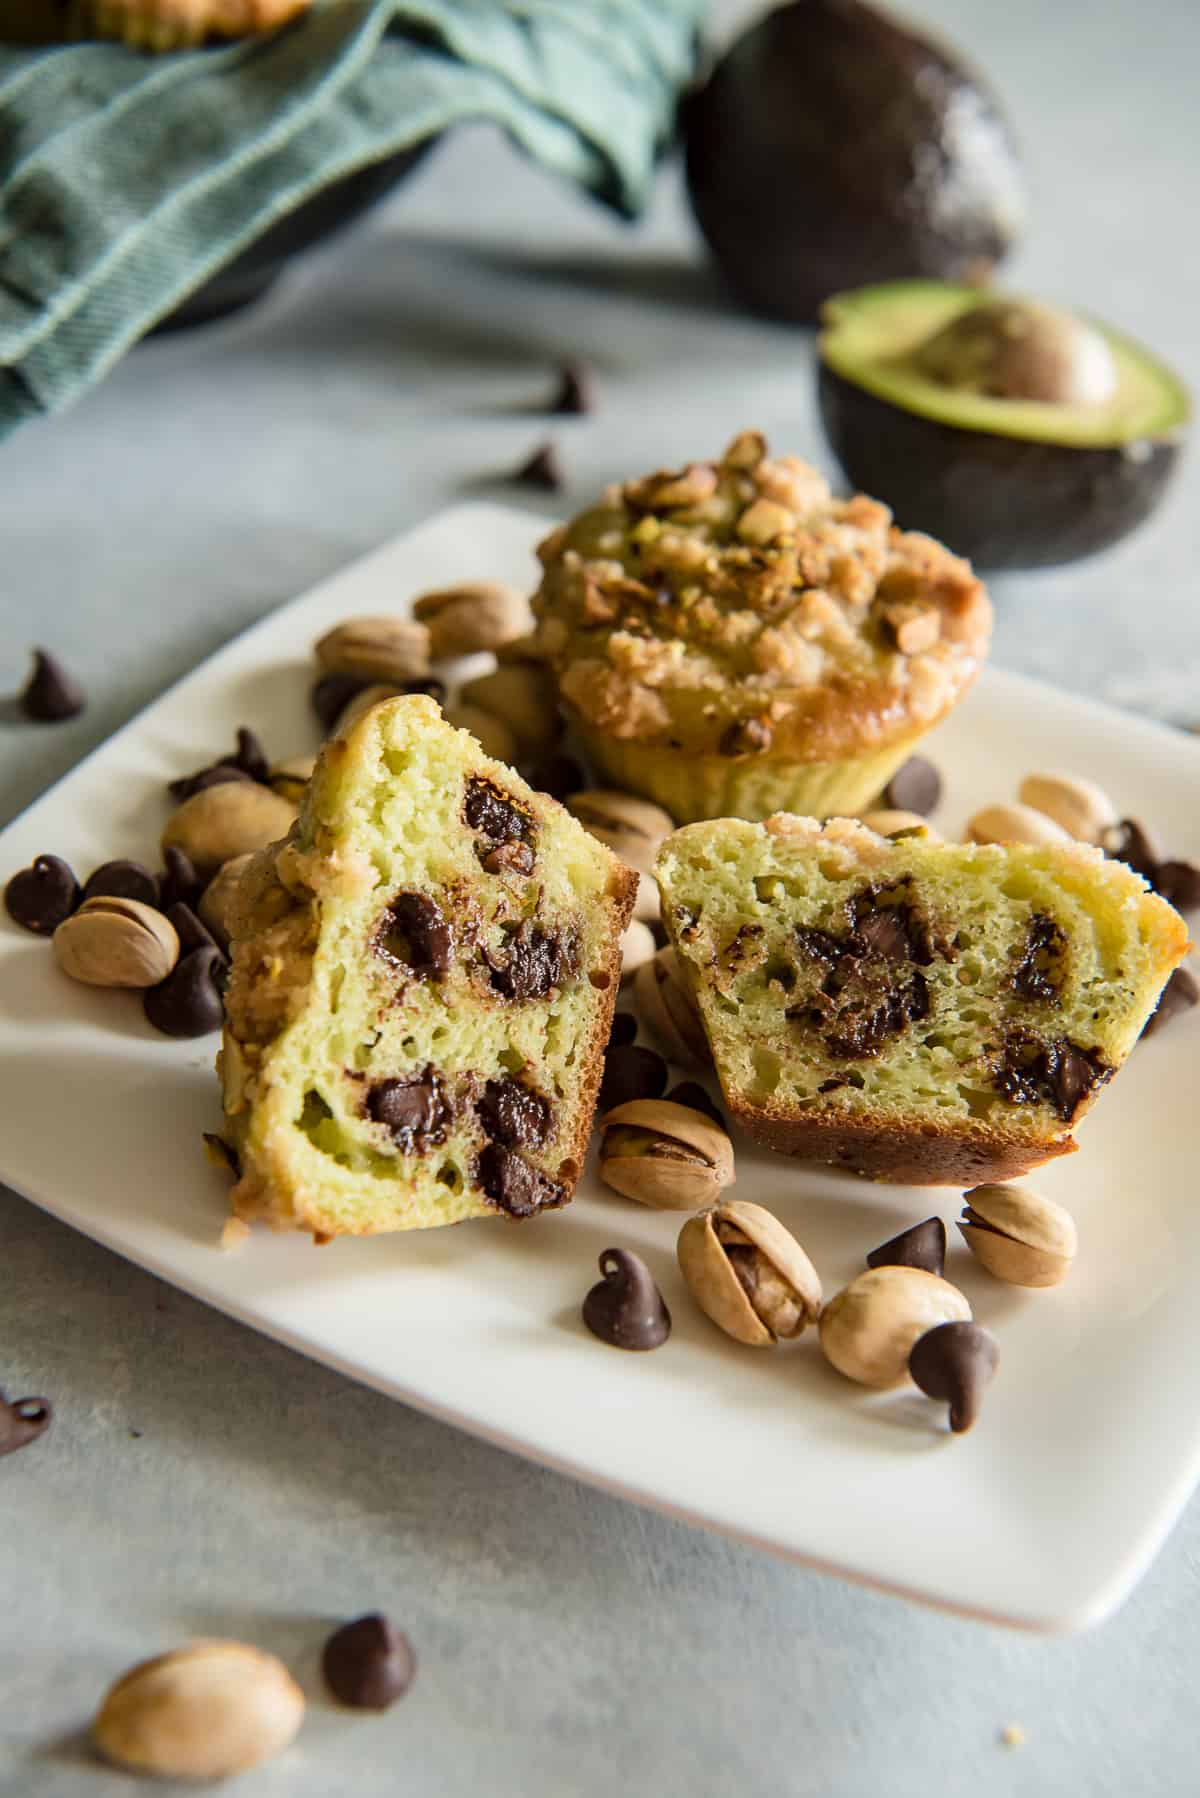 Avocado Chocolate Chip Muffins with Pistachio Crumble cut in half